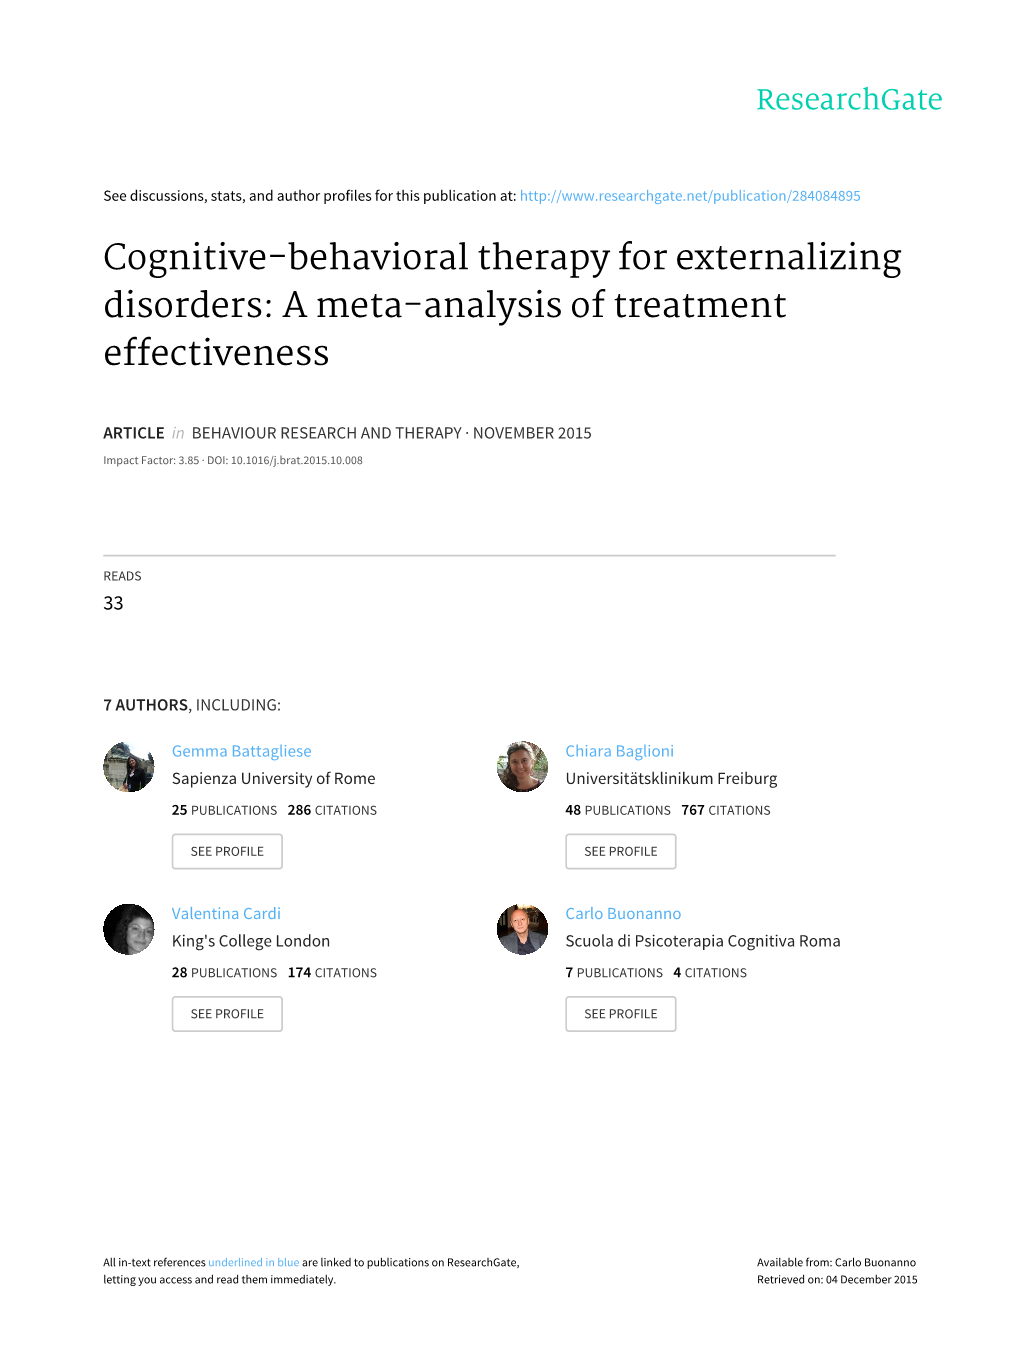 Cognitive-Behavioral Therapy for Externalizing Disorders: a Meta-Analysis of Treatment Effectiveness